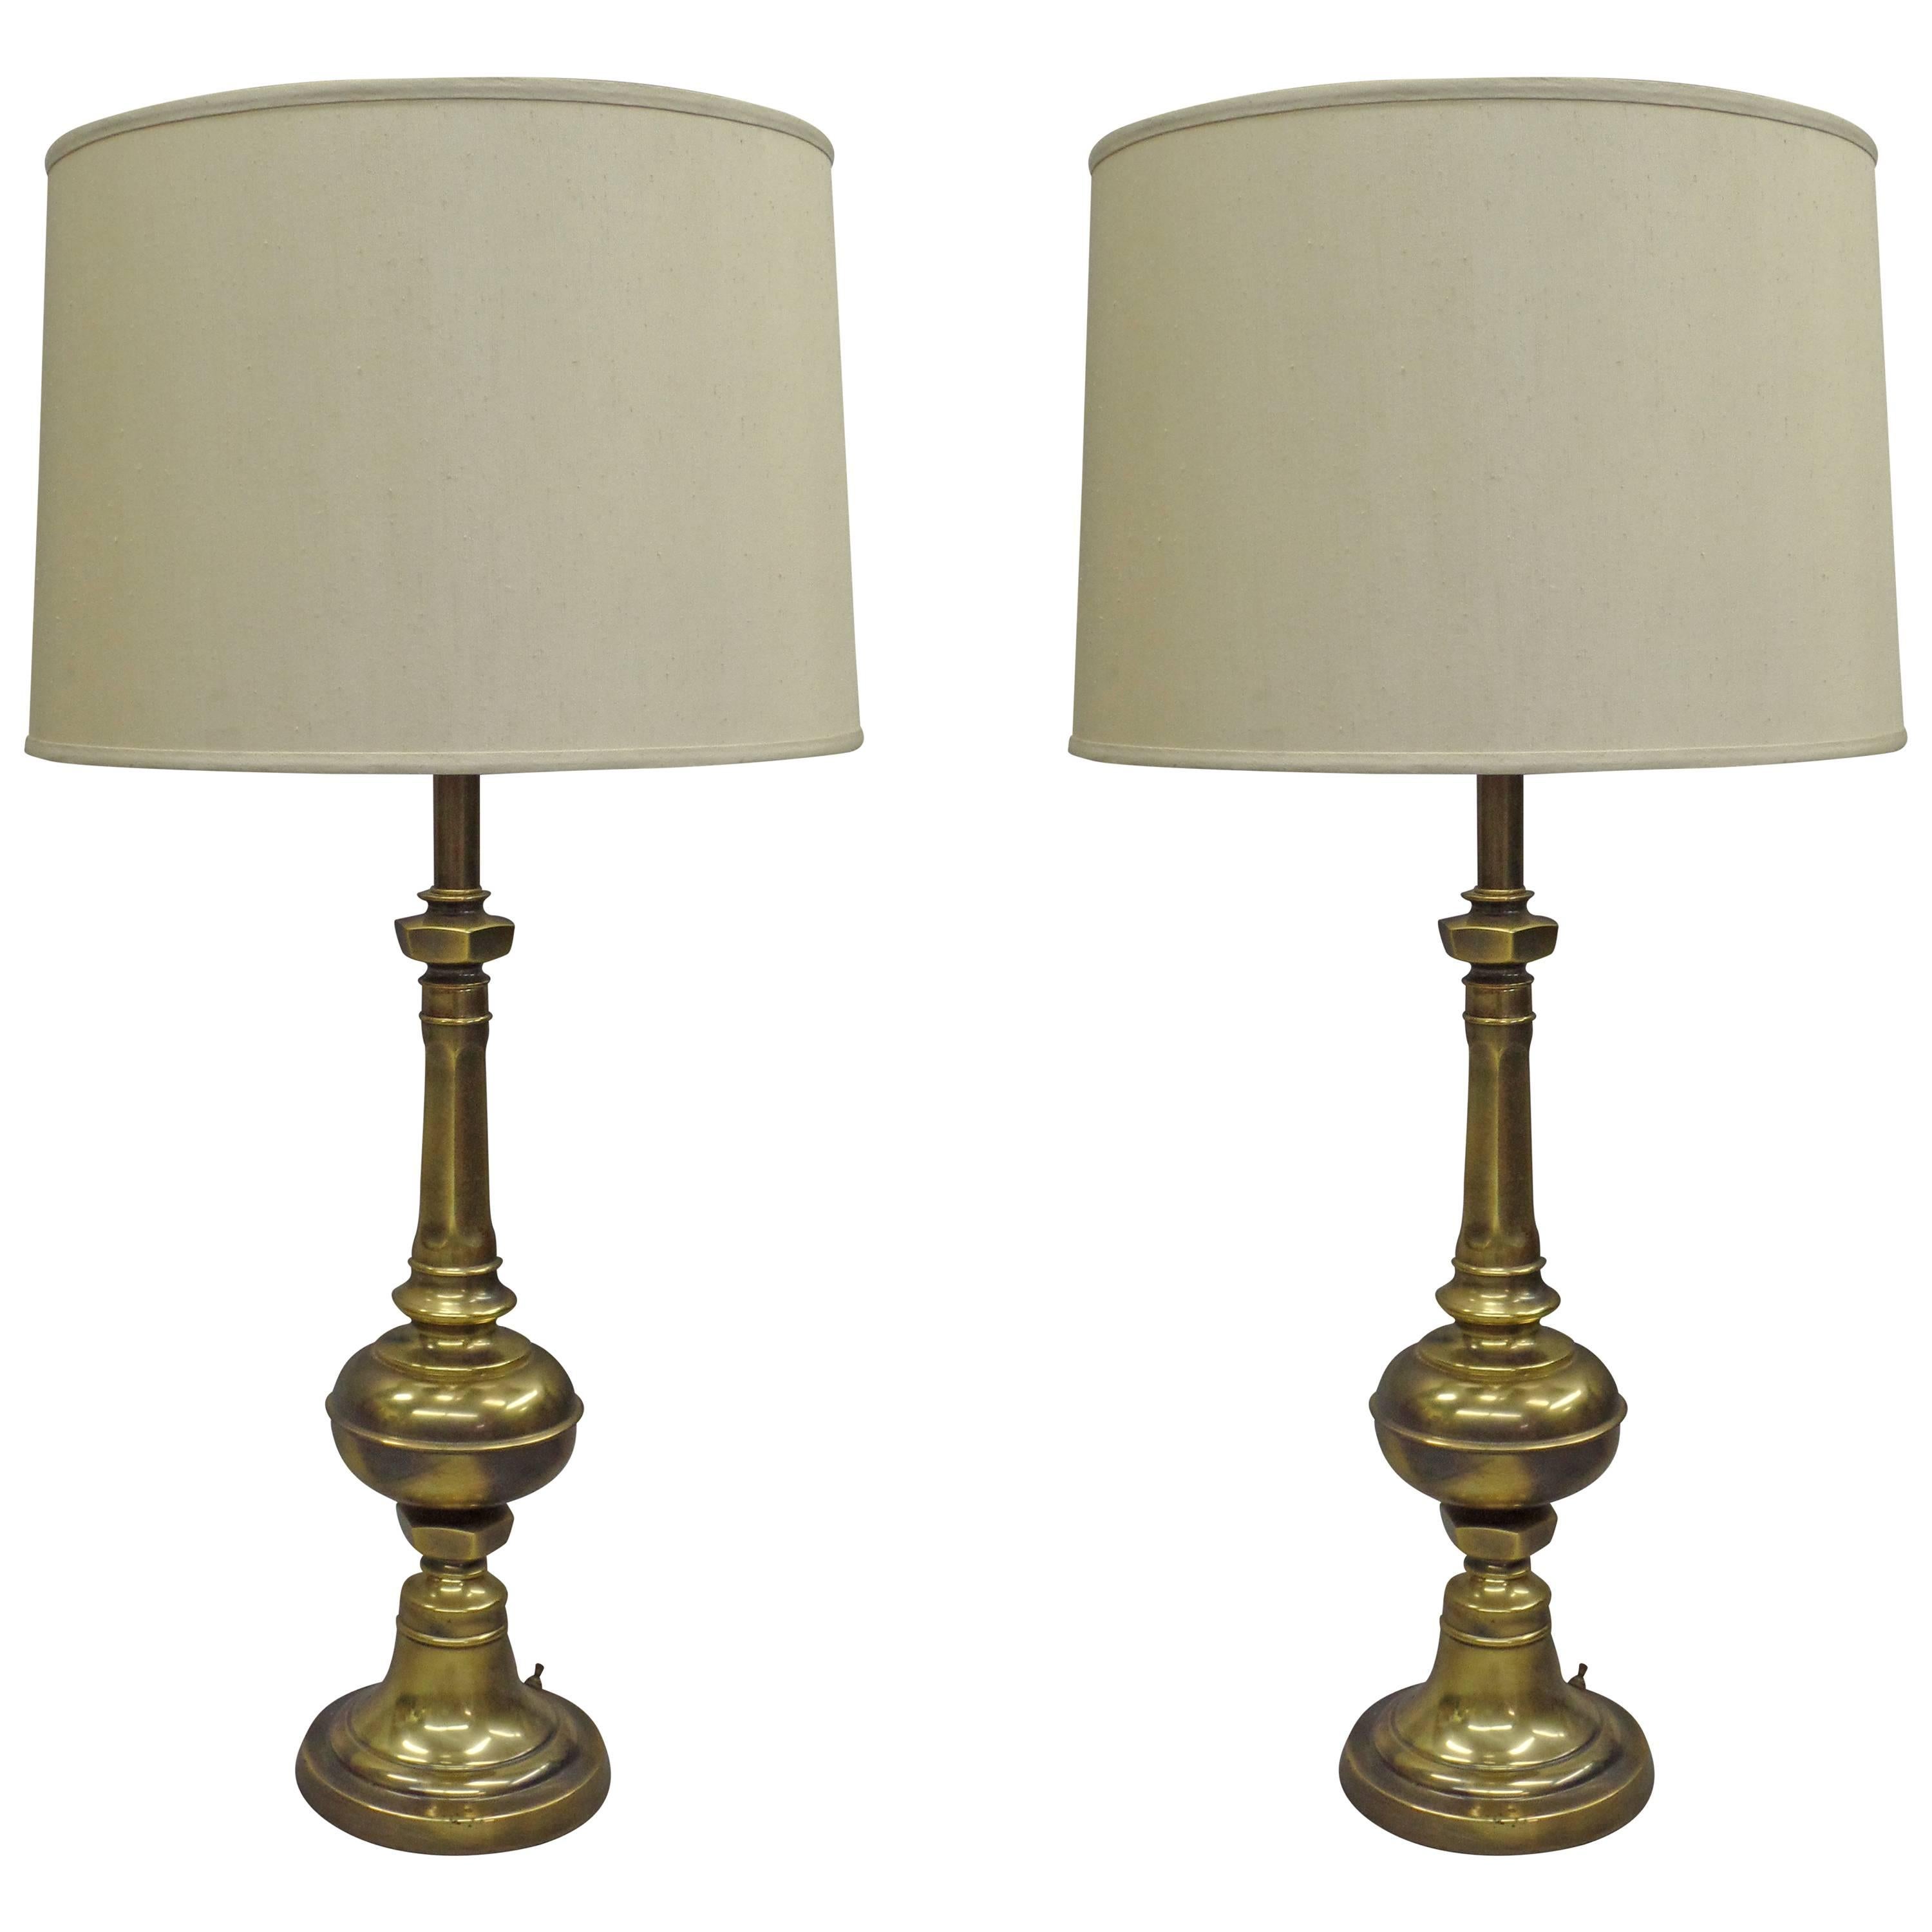 Pair of British Mid-Century Modern Neoclassical Brass Baluster Table Lamps For Sale